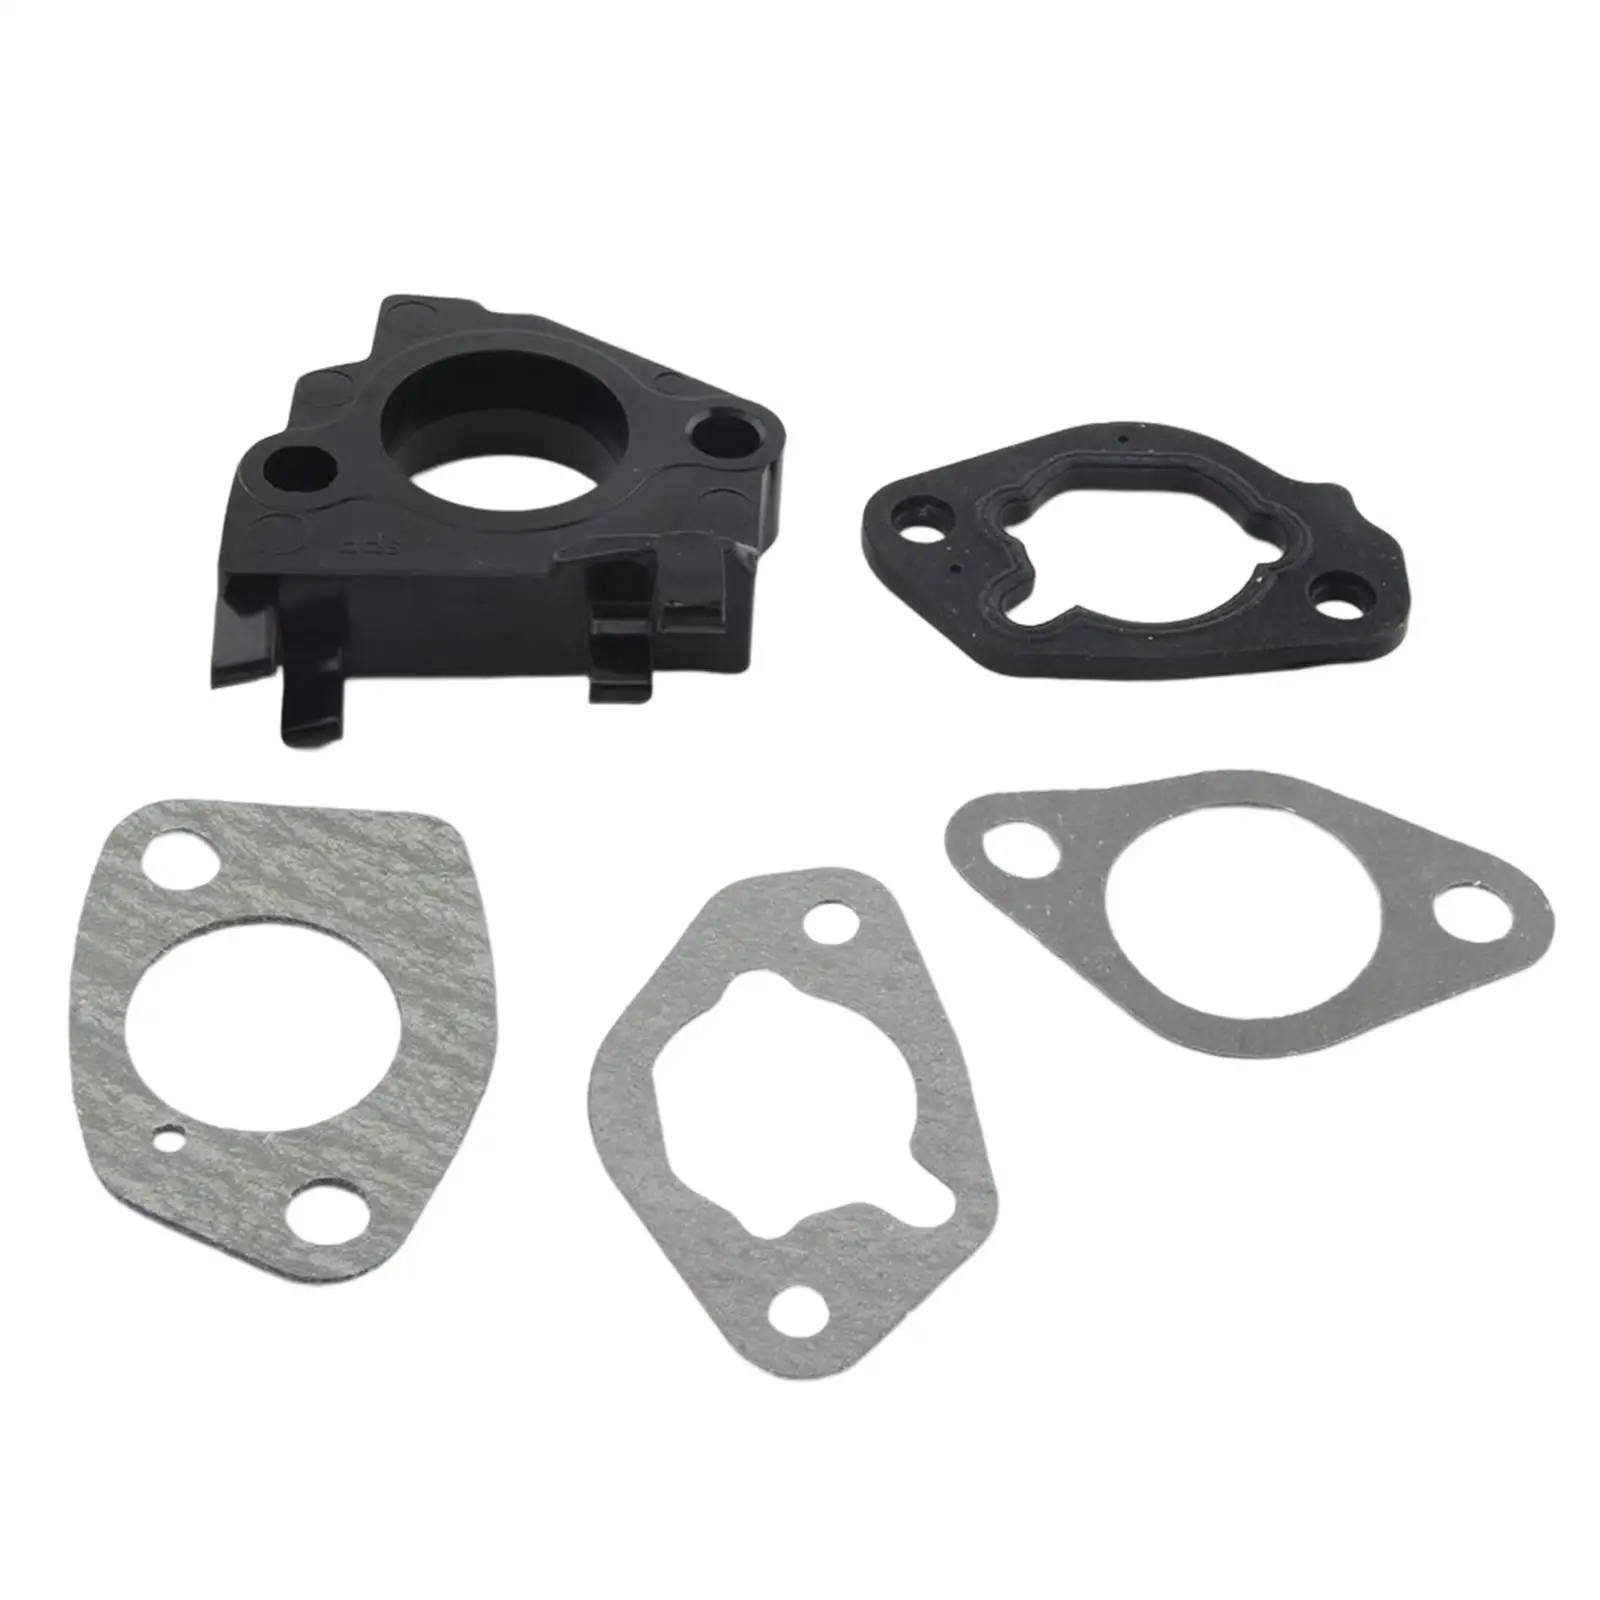 CARBURETOR 5 GASKETS SET for   13HP GX340 11HP Replace 50MM